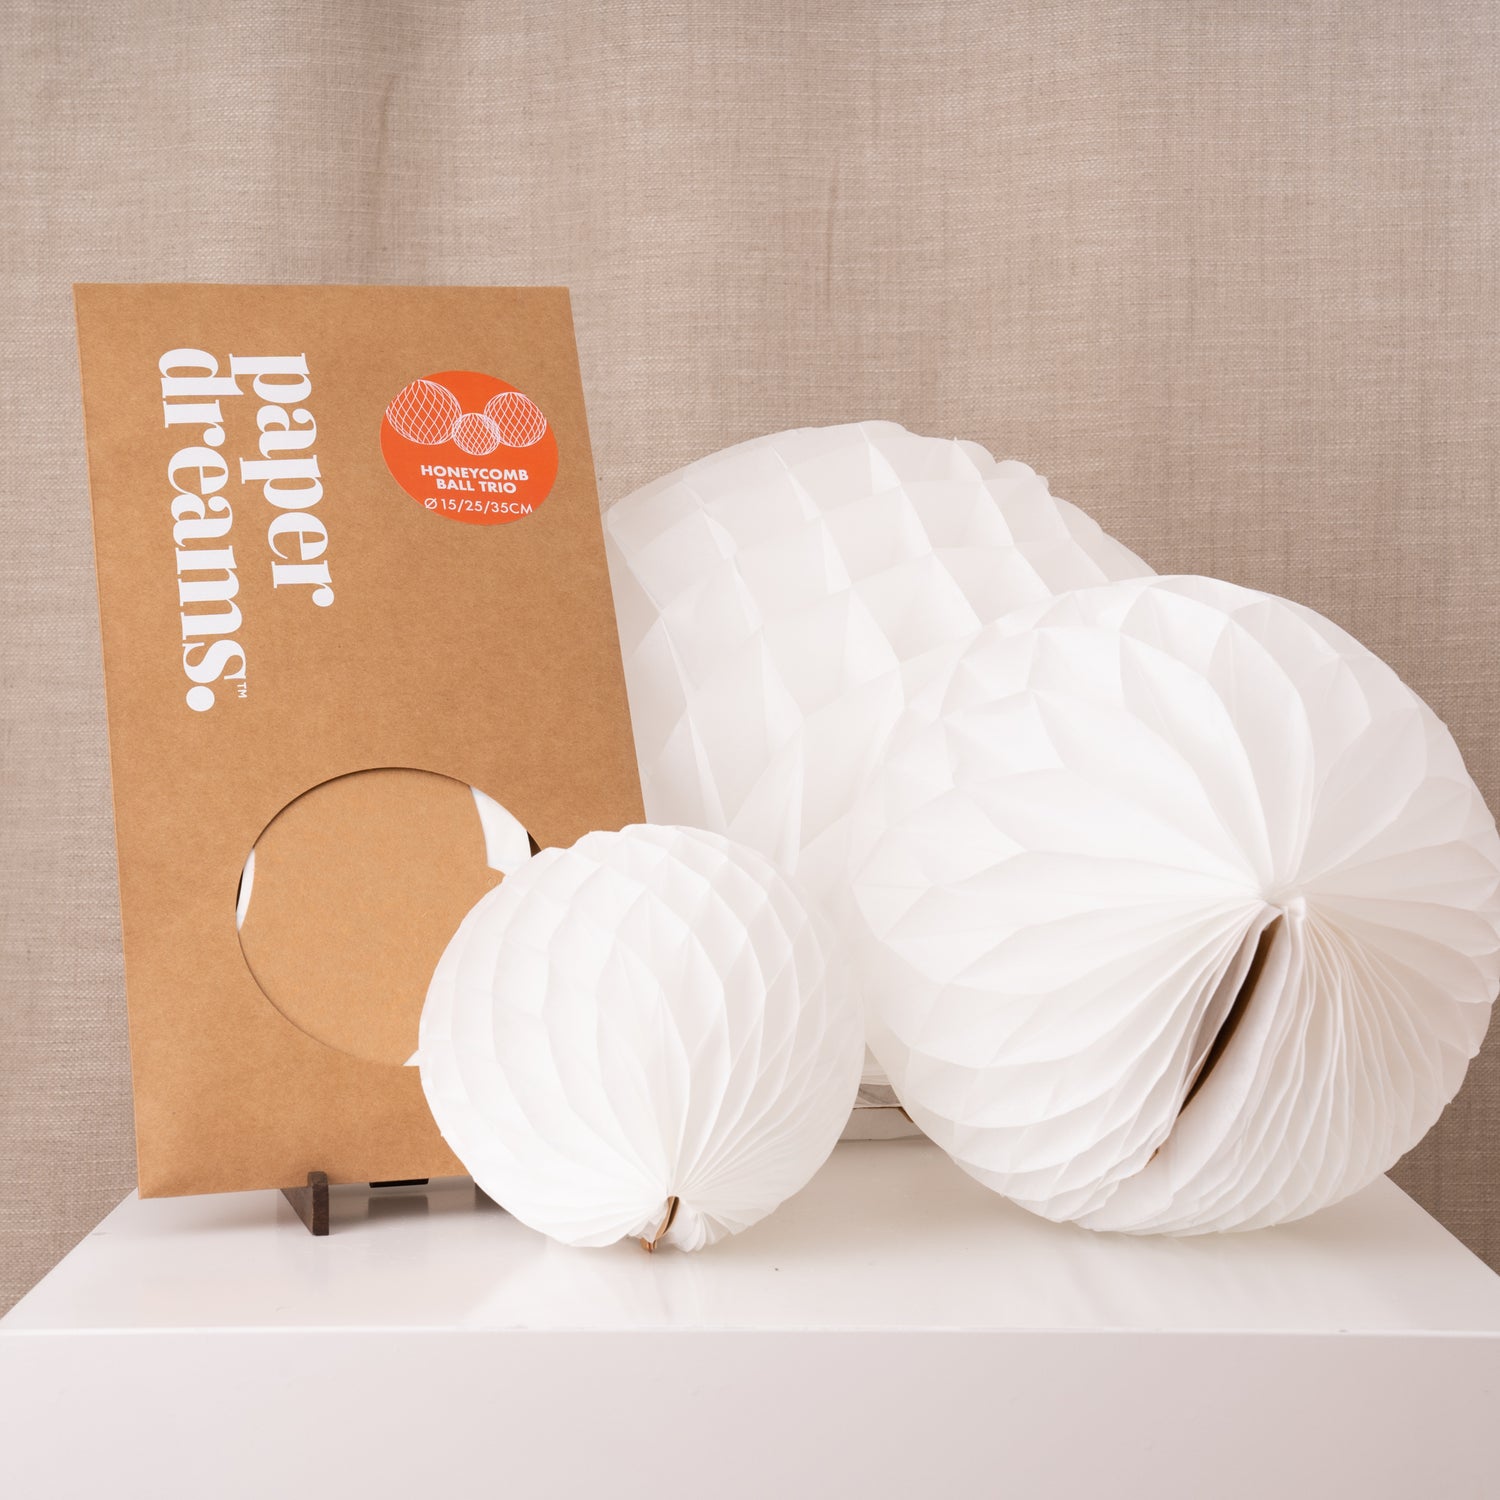 Paper Dreams Honeycomb Ball set of 3 Plastic Free Decorations White